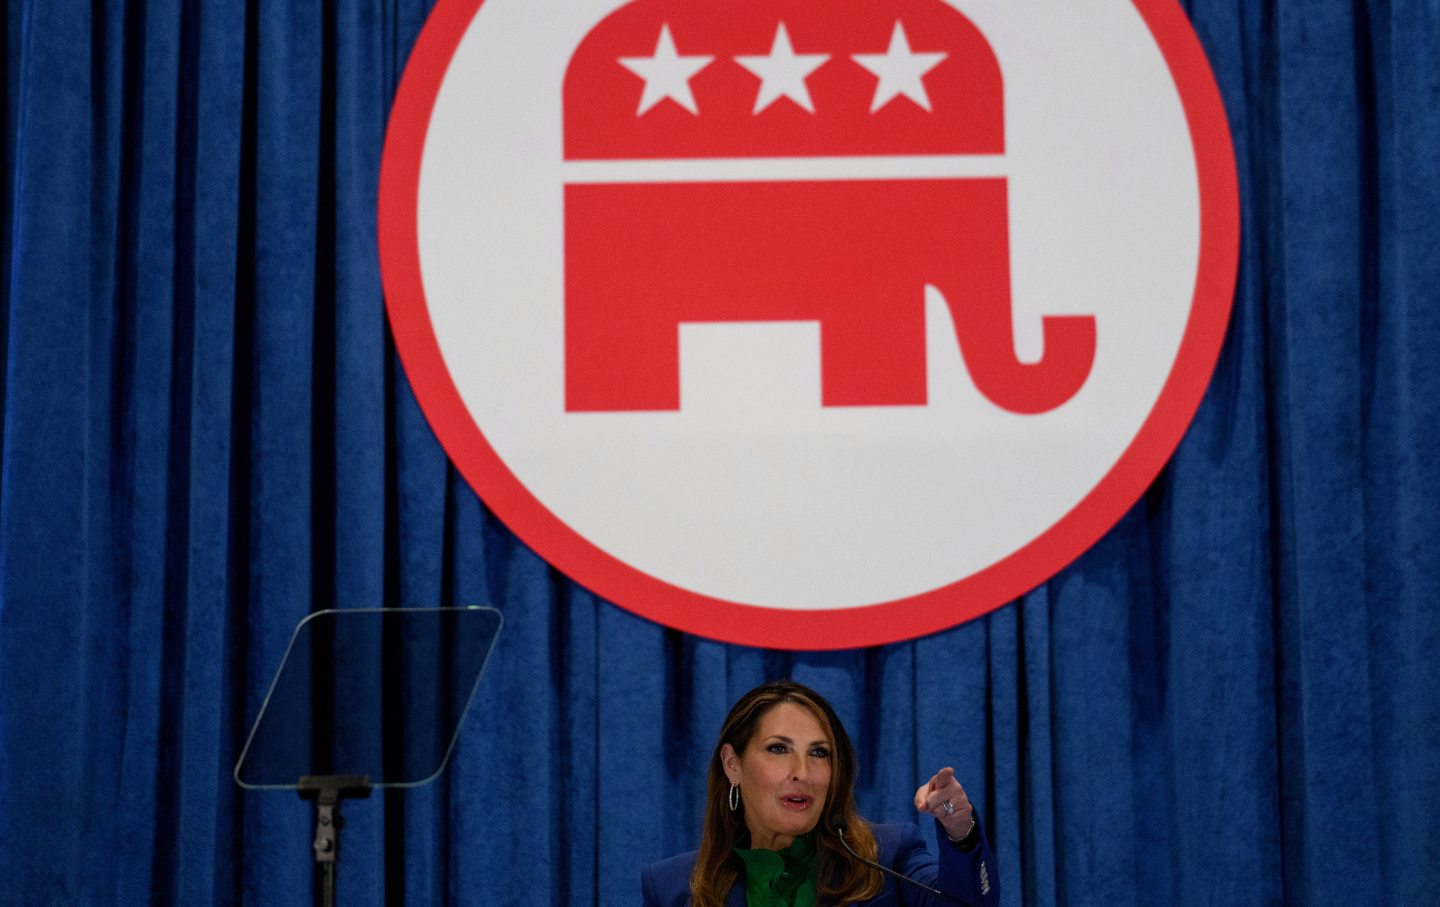 Then-RNC chair Ronna McDaniel under a large poster of a GOP elephant.